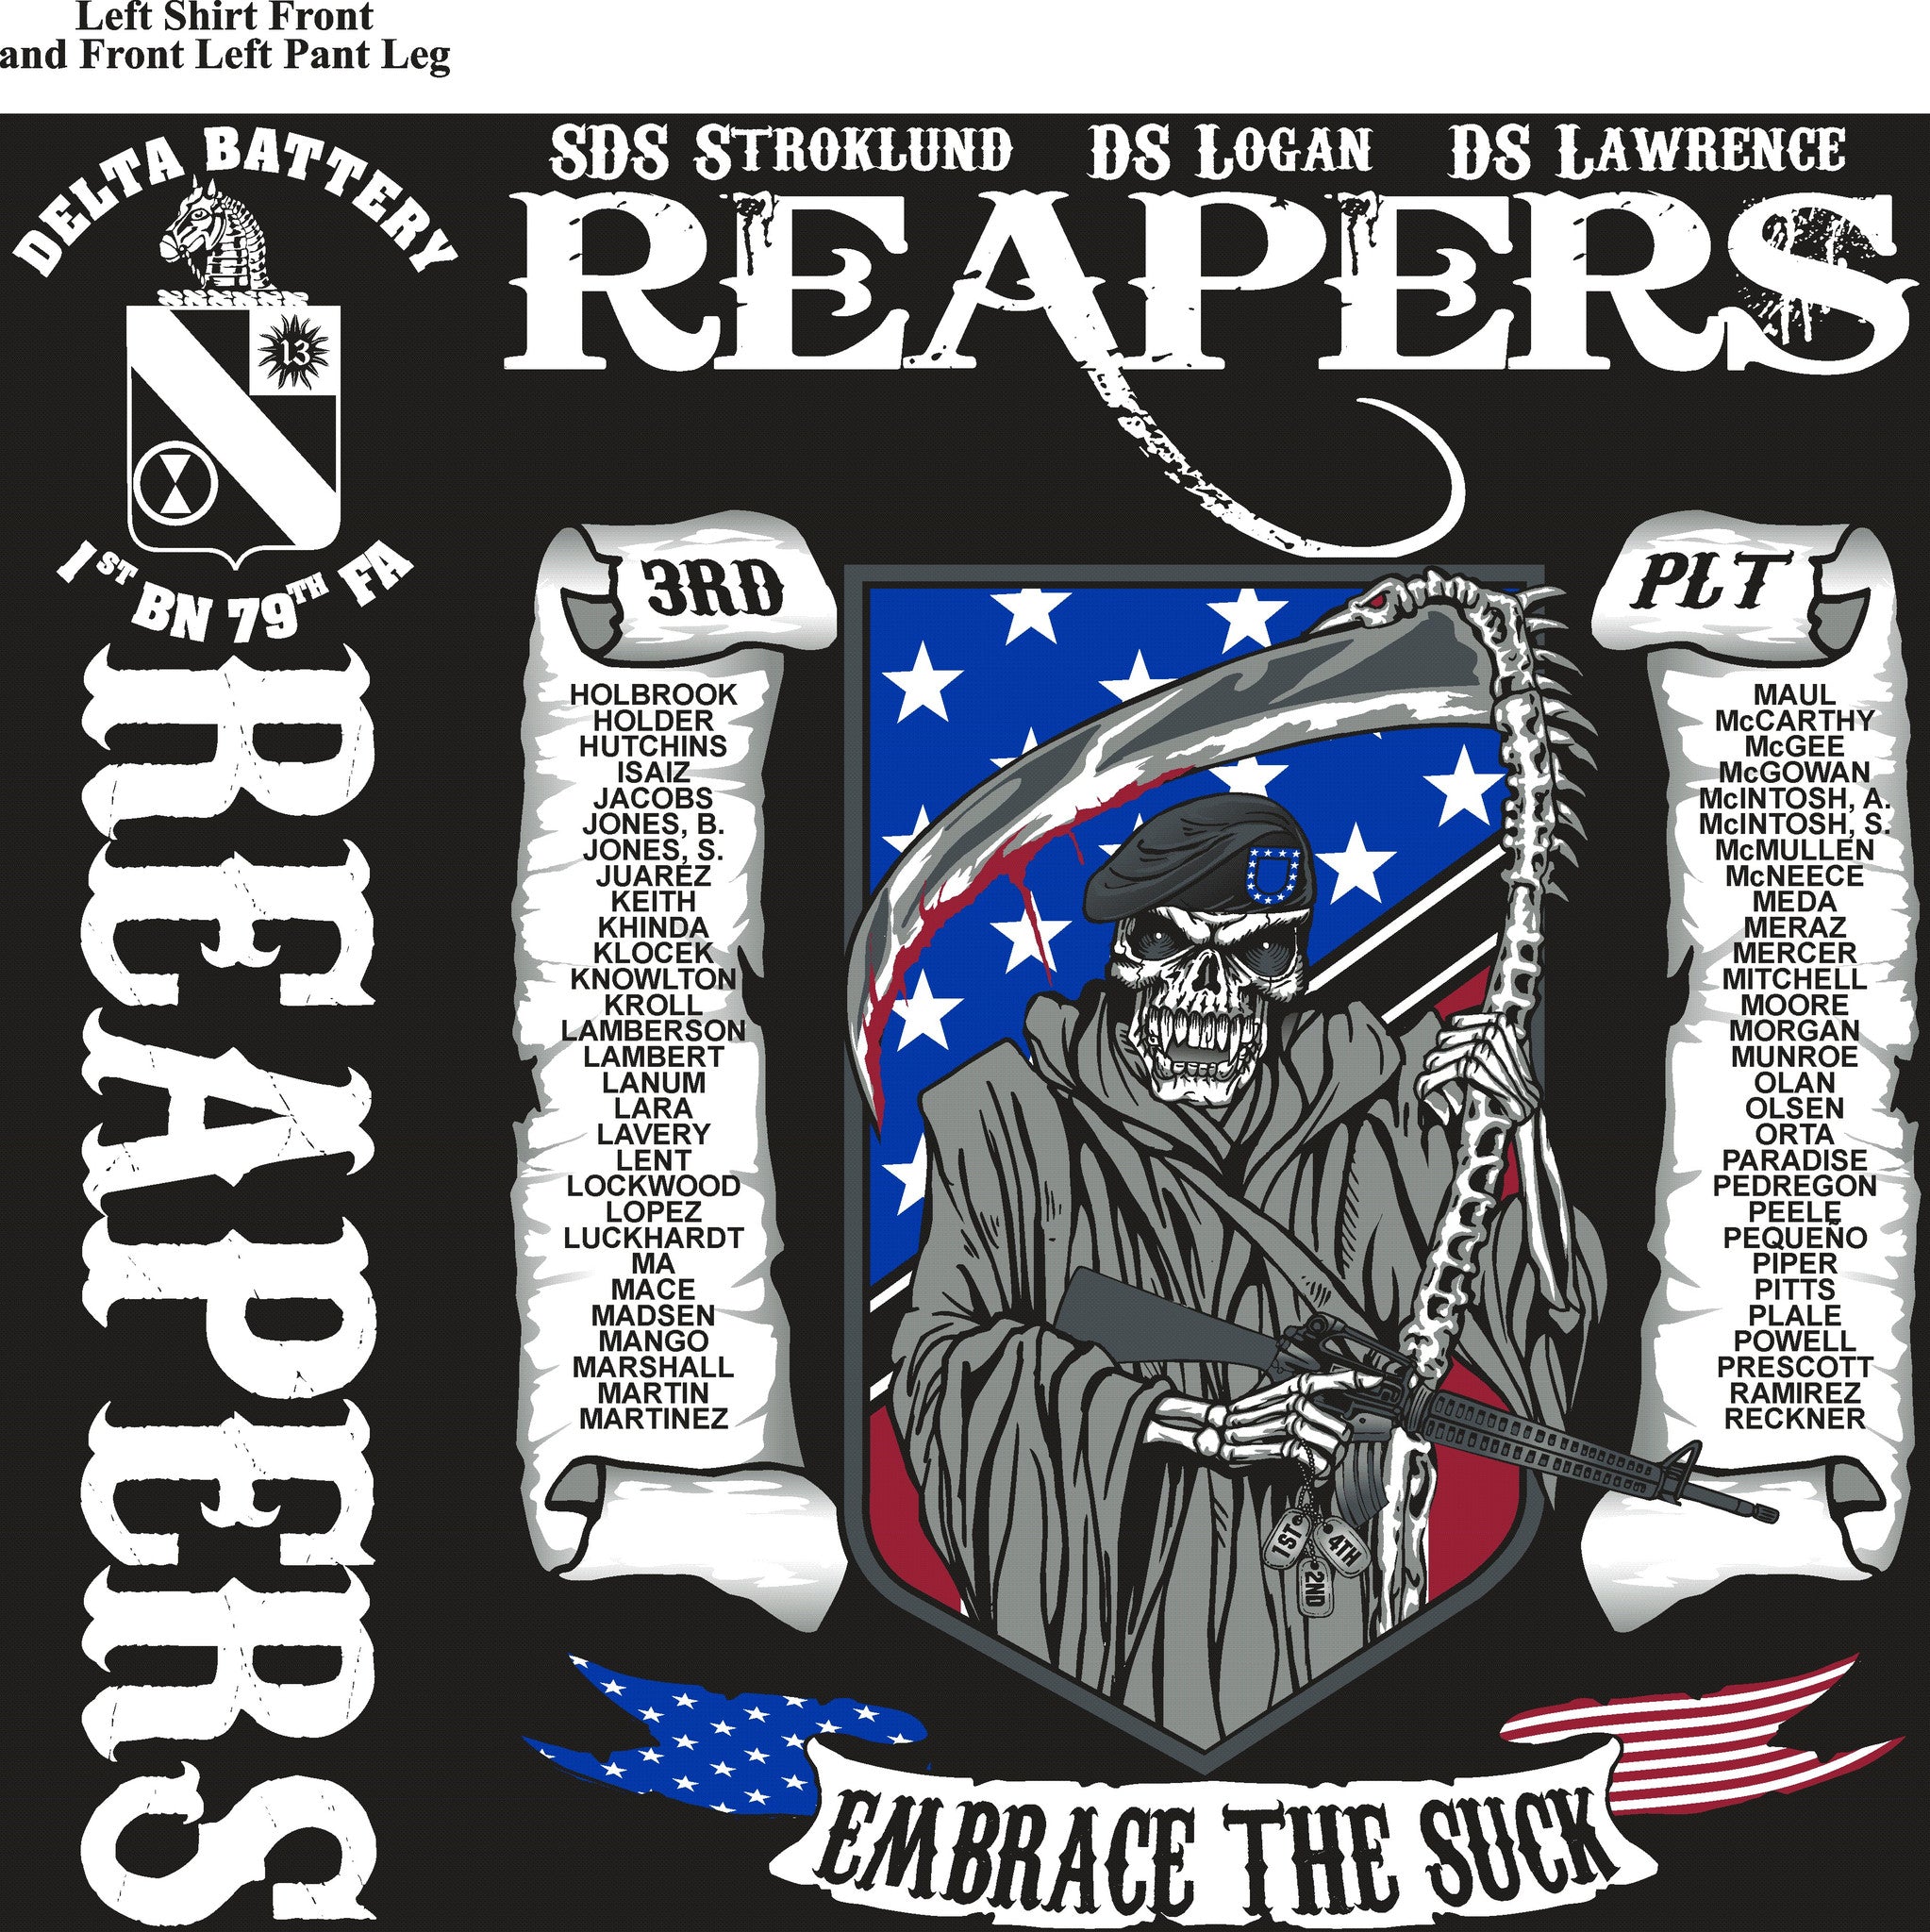 Platoon Shirts Delta 1st 79th REAPERS AUG 2015